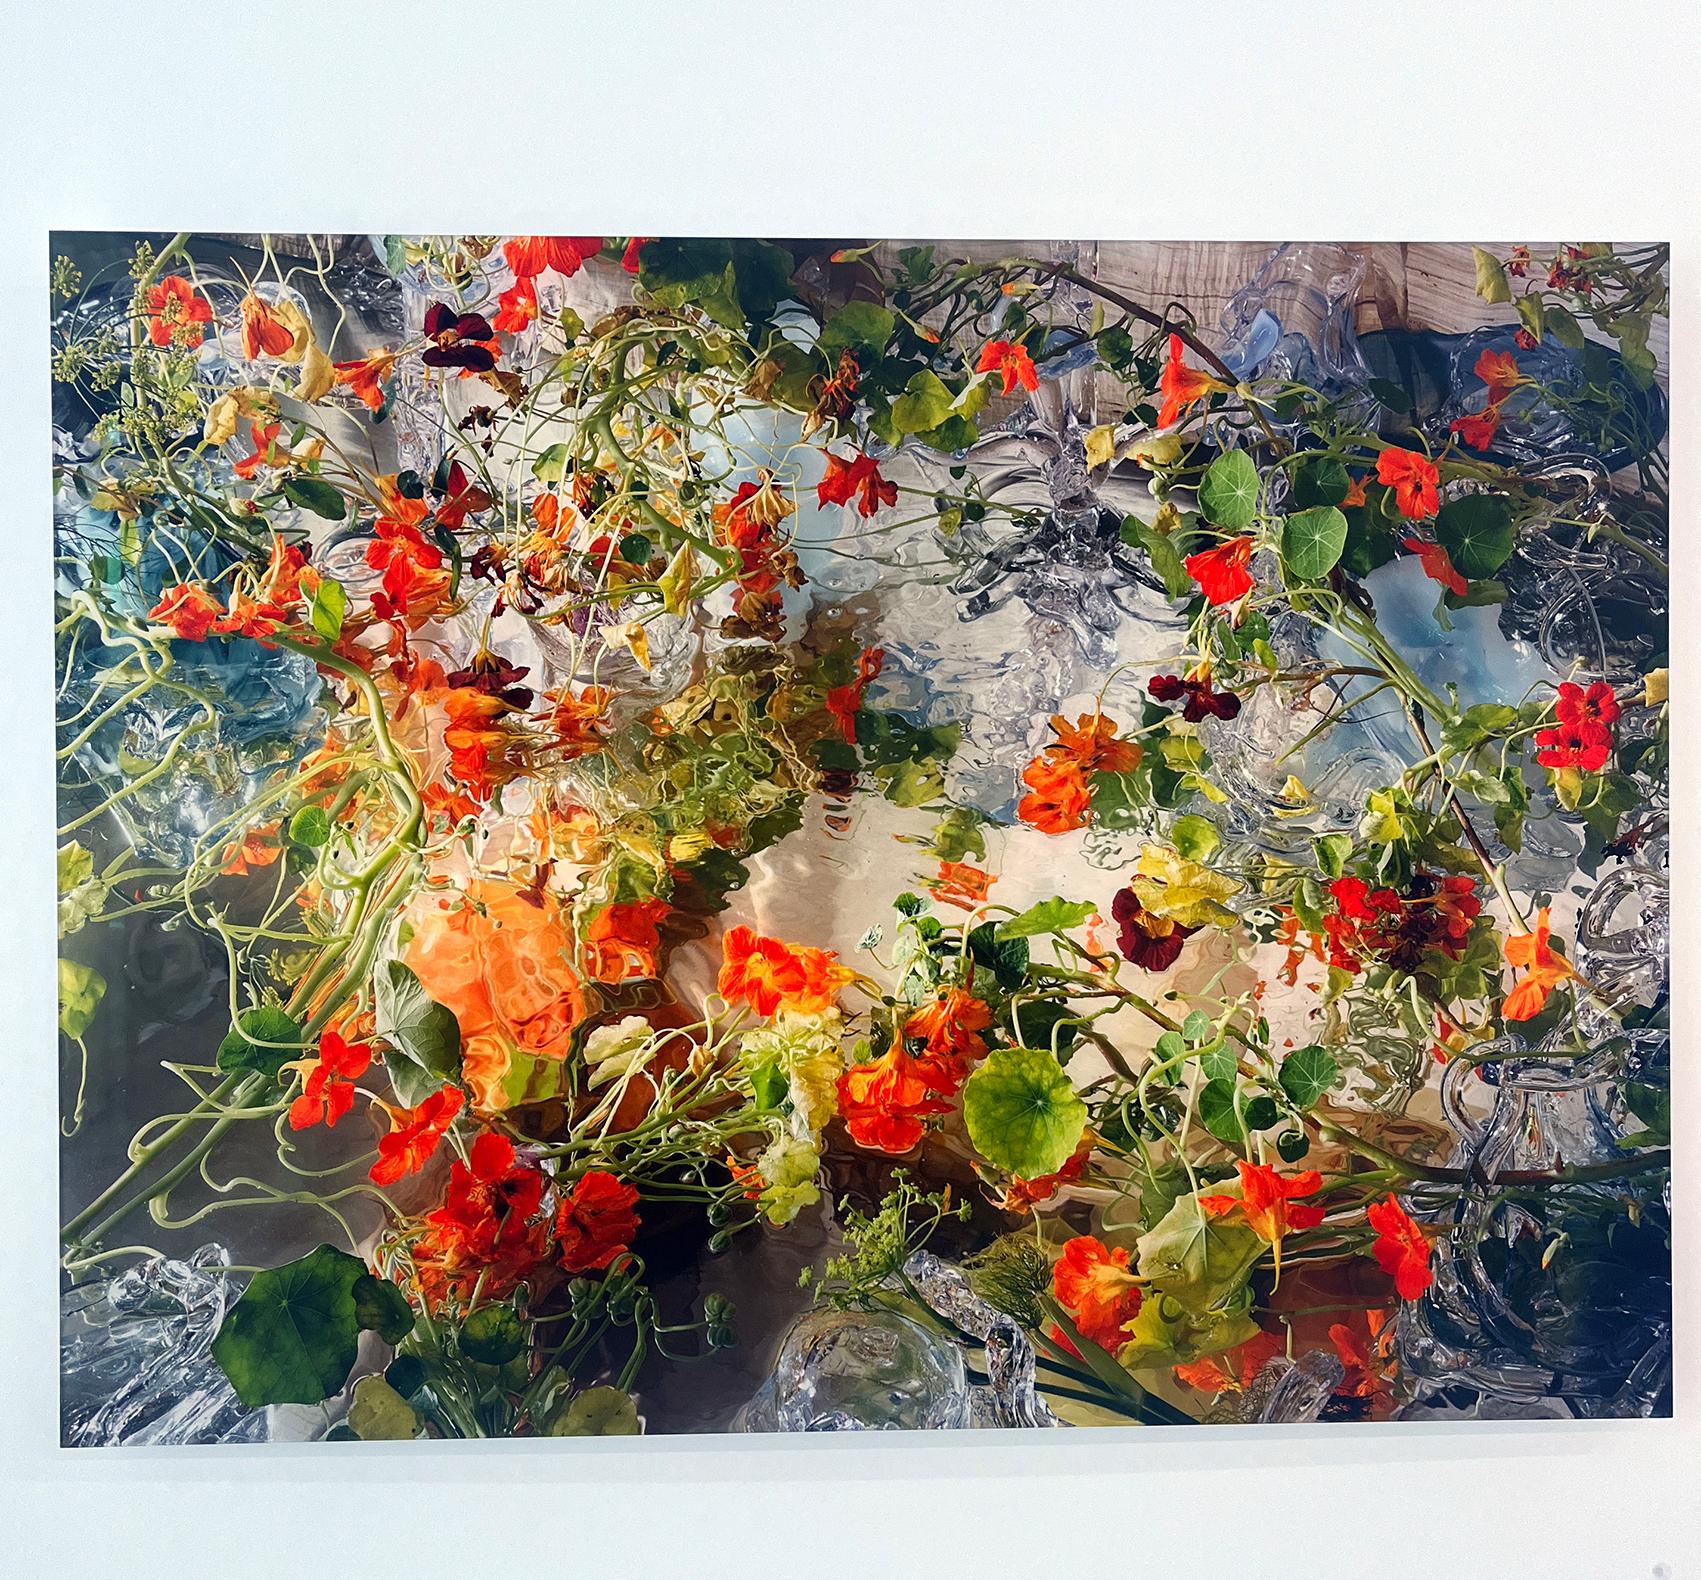 Another highlight is Margriet Smulders, a renowned photographer since the early 1990s, with her enchanting still lifes made by flowers. Her works have been part of over 40 collections worldwide and can be seen in many Dutch consulates all over the